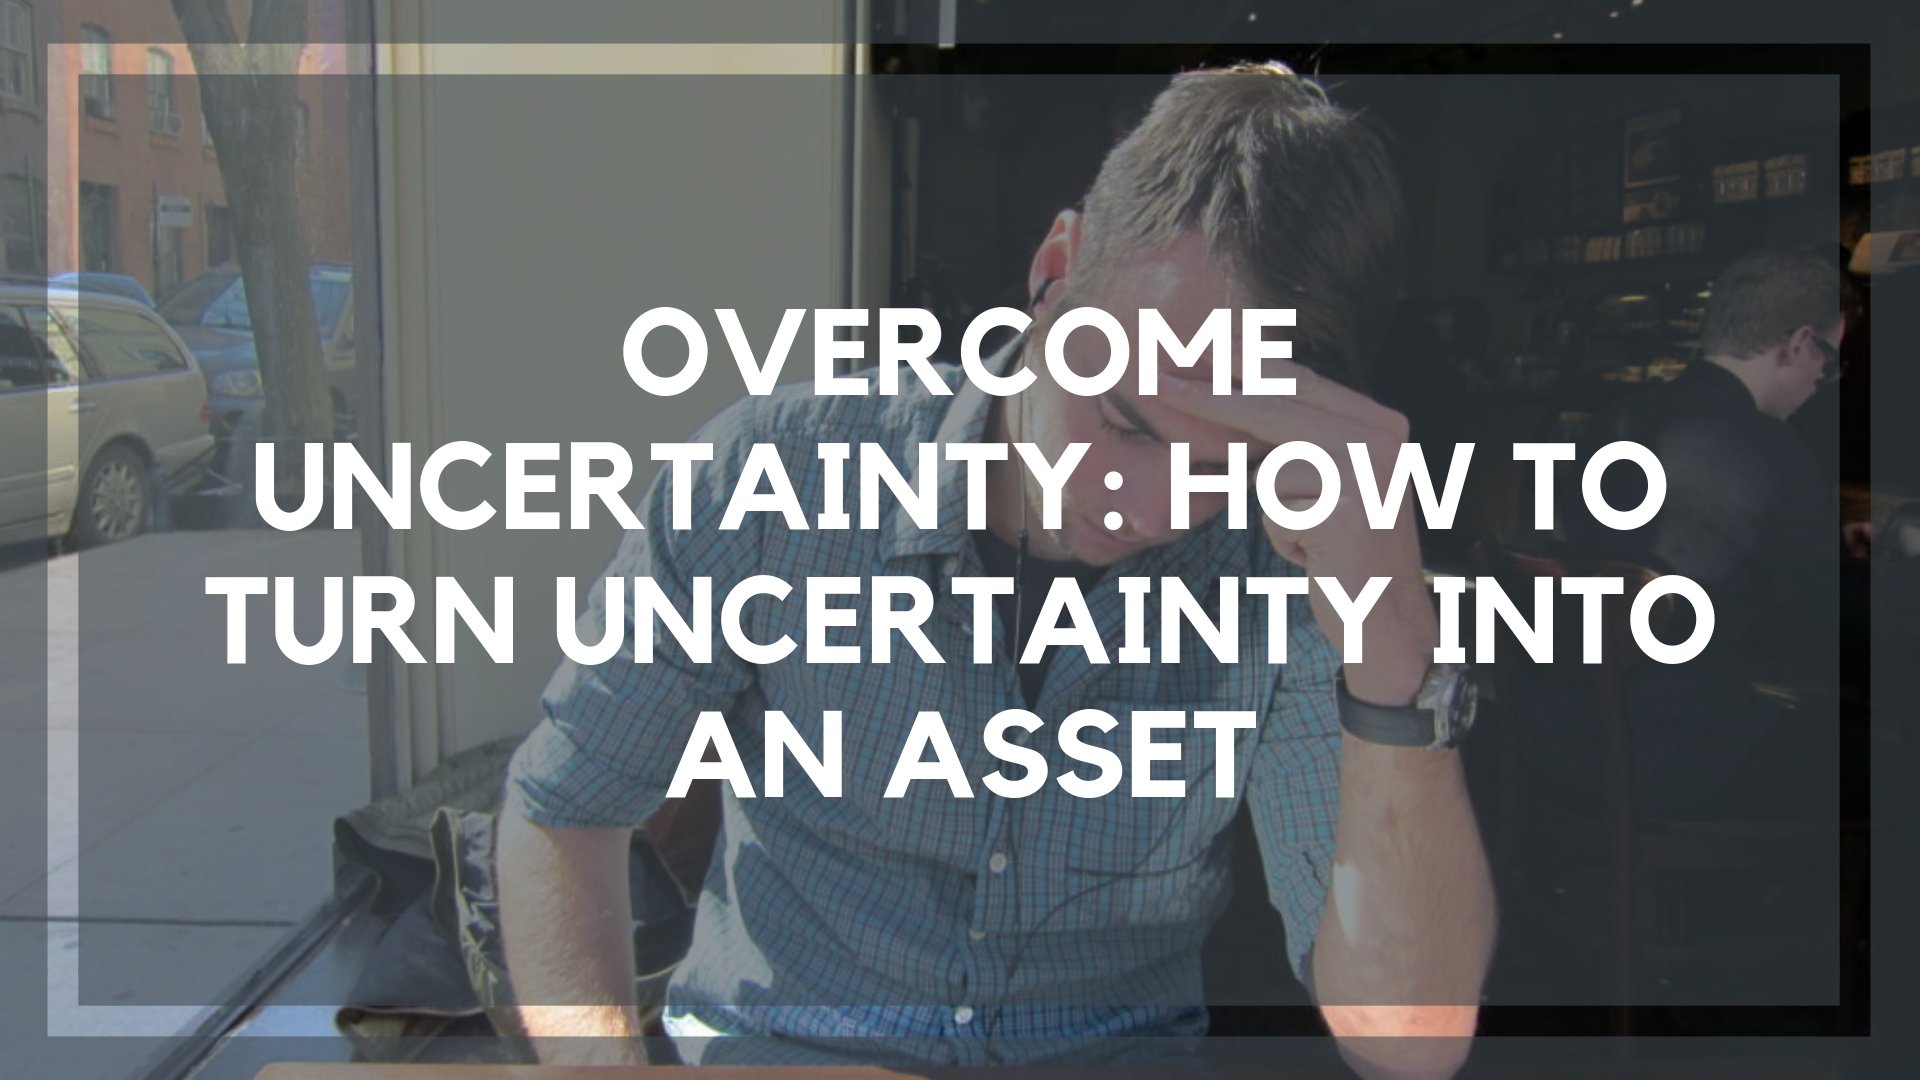 Overcome Uncertainty: How To Turn Uncertainty into an Asset